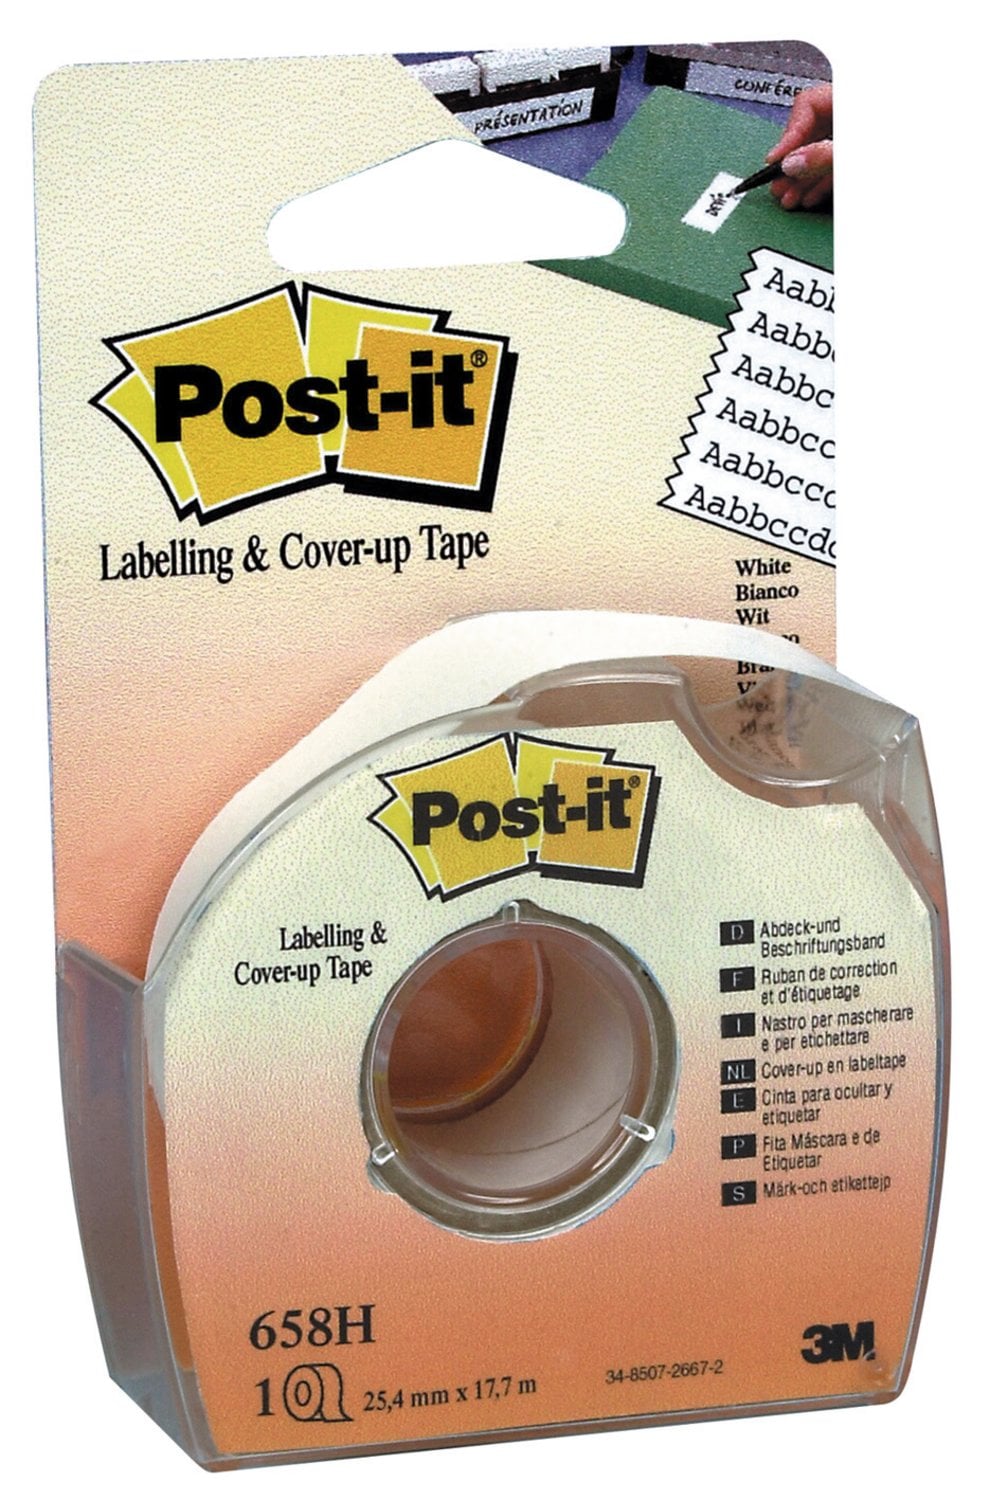 7100263578 - Post-it Labeling and Cover-up Tape 658, 1 in x 700 in (25.4 mm x 17.7 m)